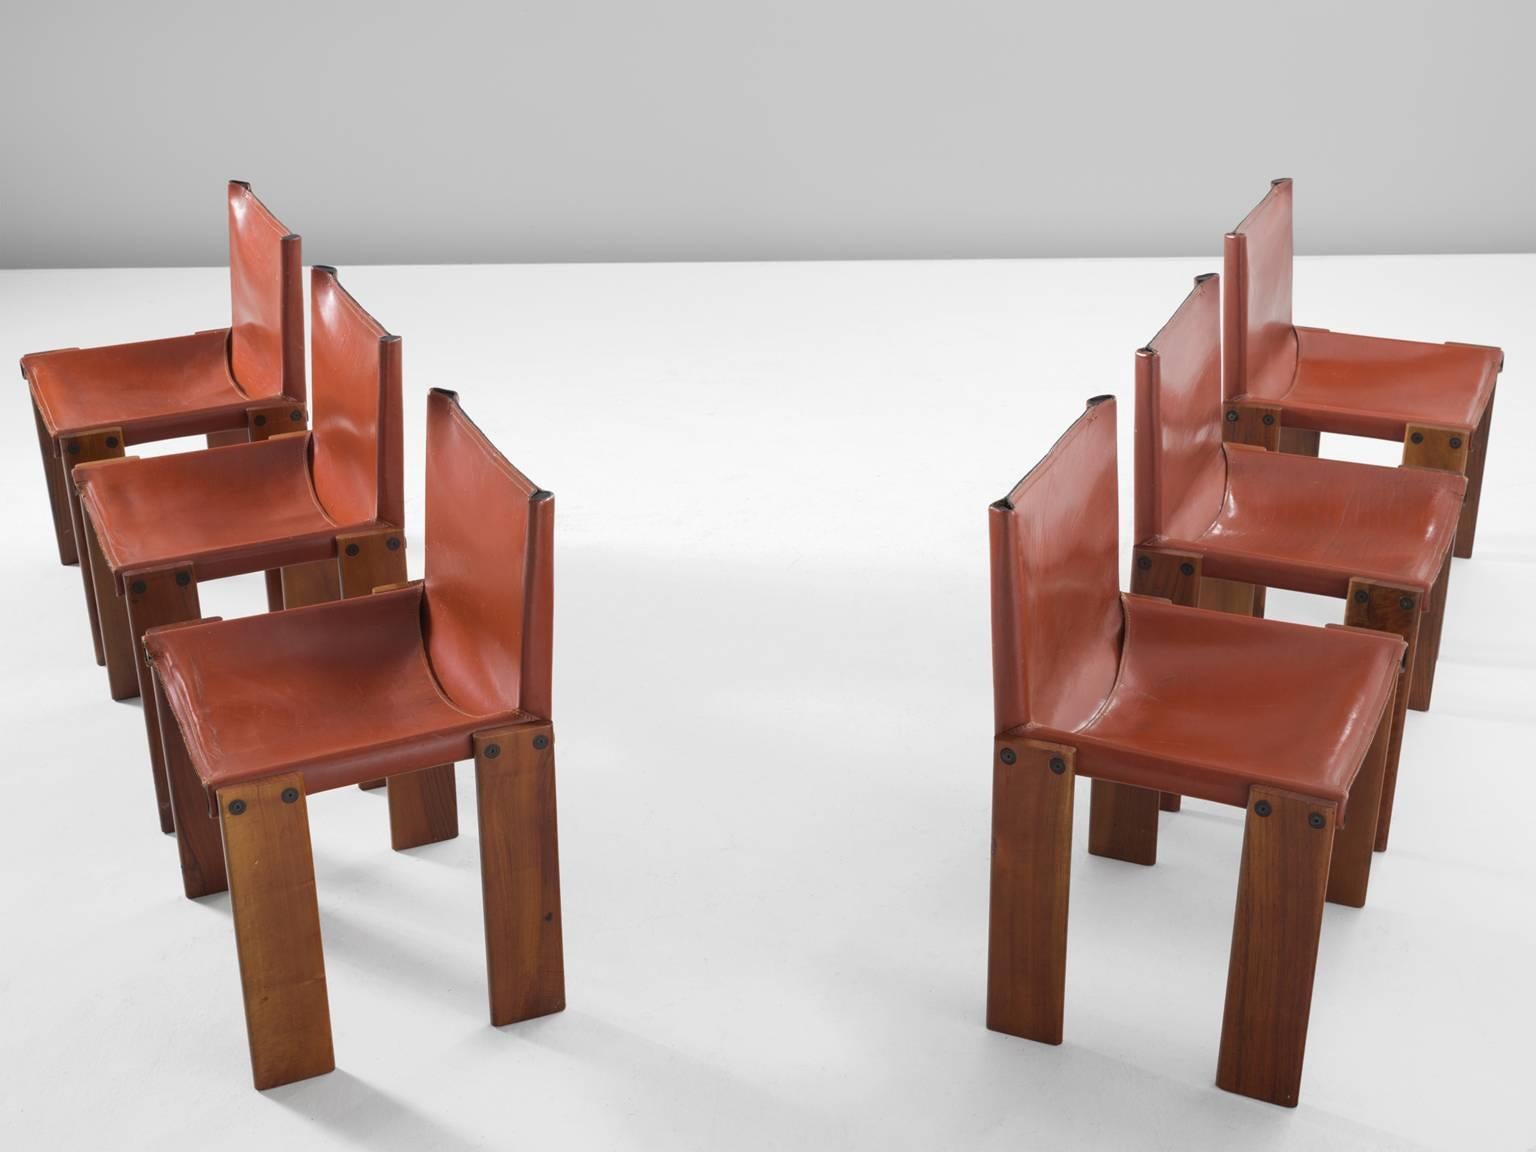 Dining chairs by Arfa & Tobia Scarpa, oak and Sienna red leather, Italy, 1974.

These rare six chairs are strong and sturdy in their design. The wonderfully warm leather is very wel suited to the patinated oak. Interesting is the 'flat' shape of